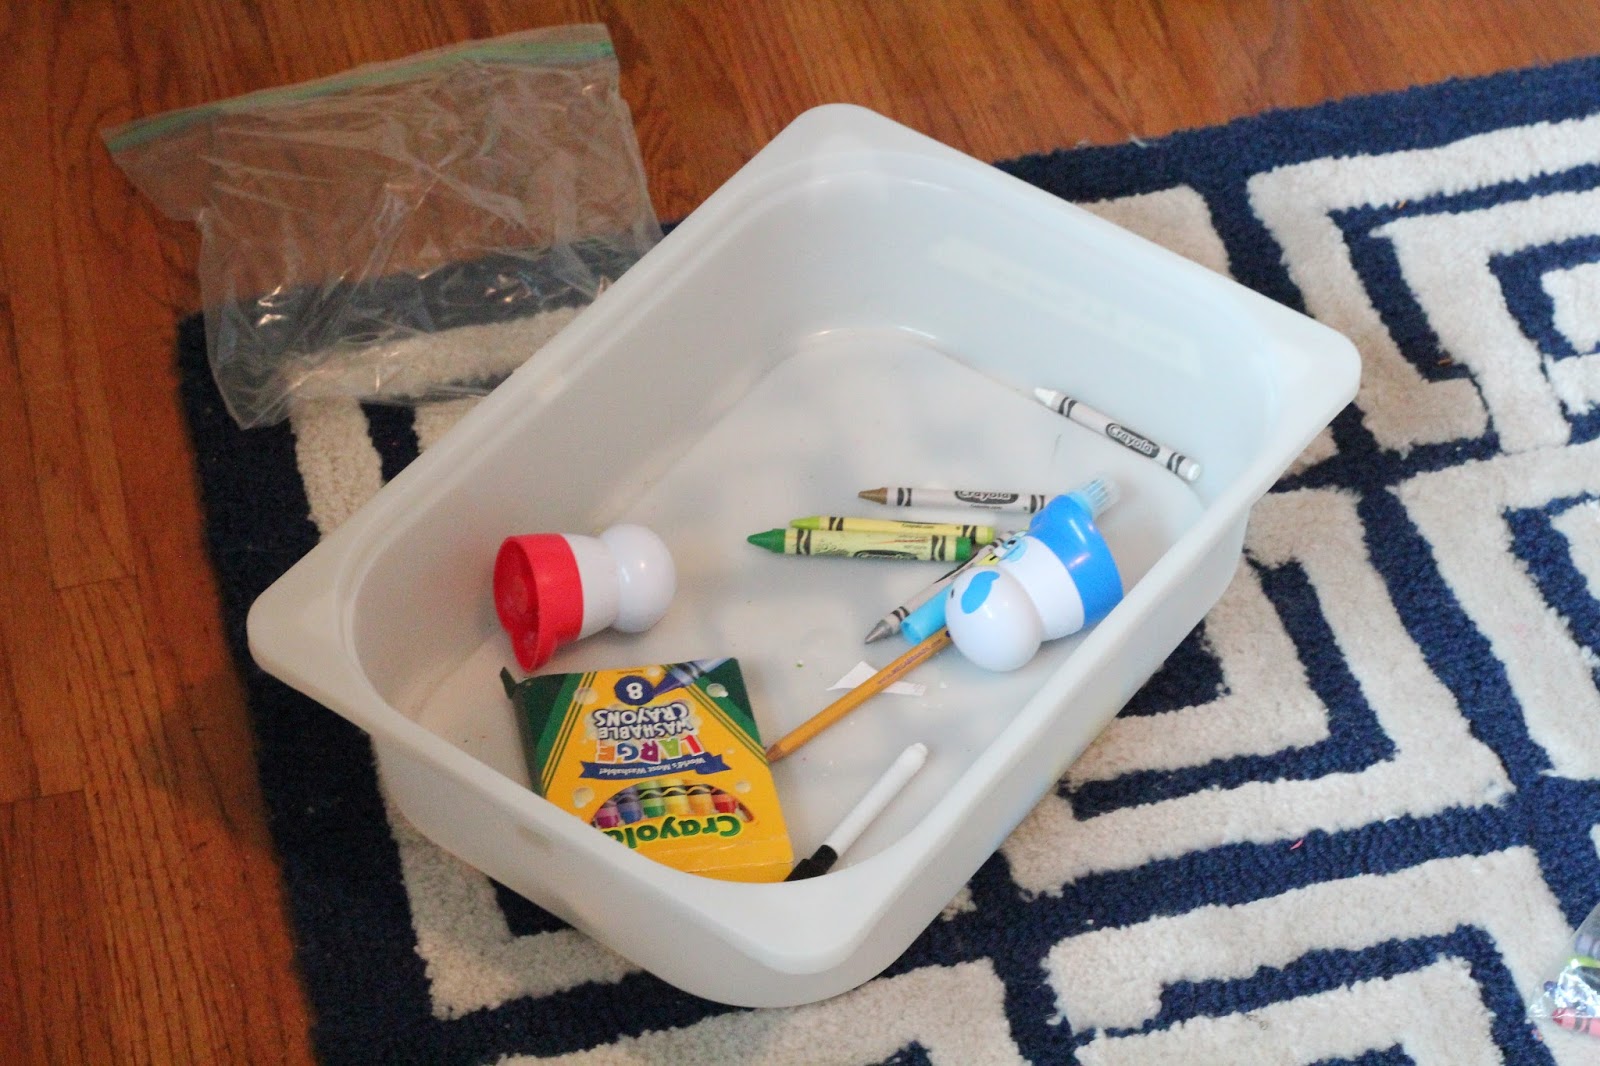 Confessions of a Tot School Mom: Toddler Art Supplies